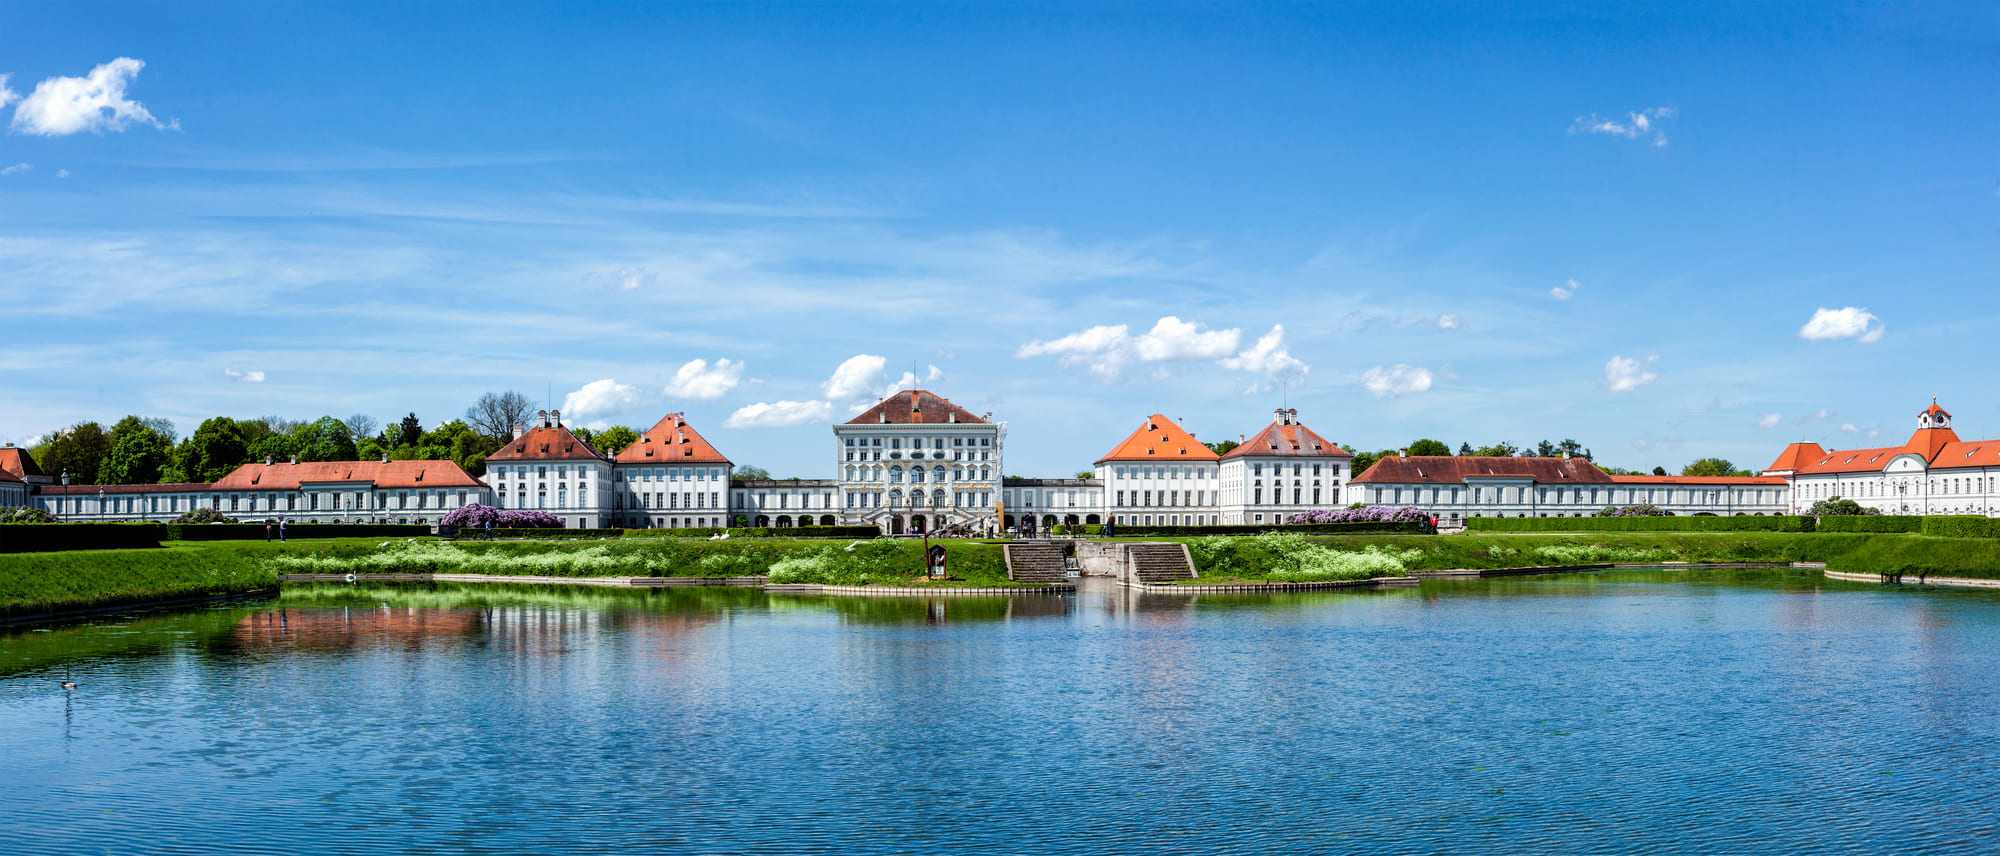 Nymphenburg Castle from the front.